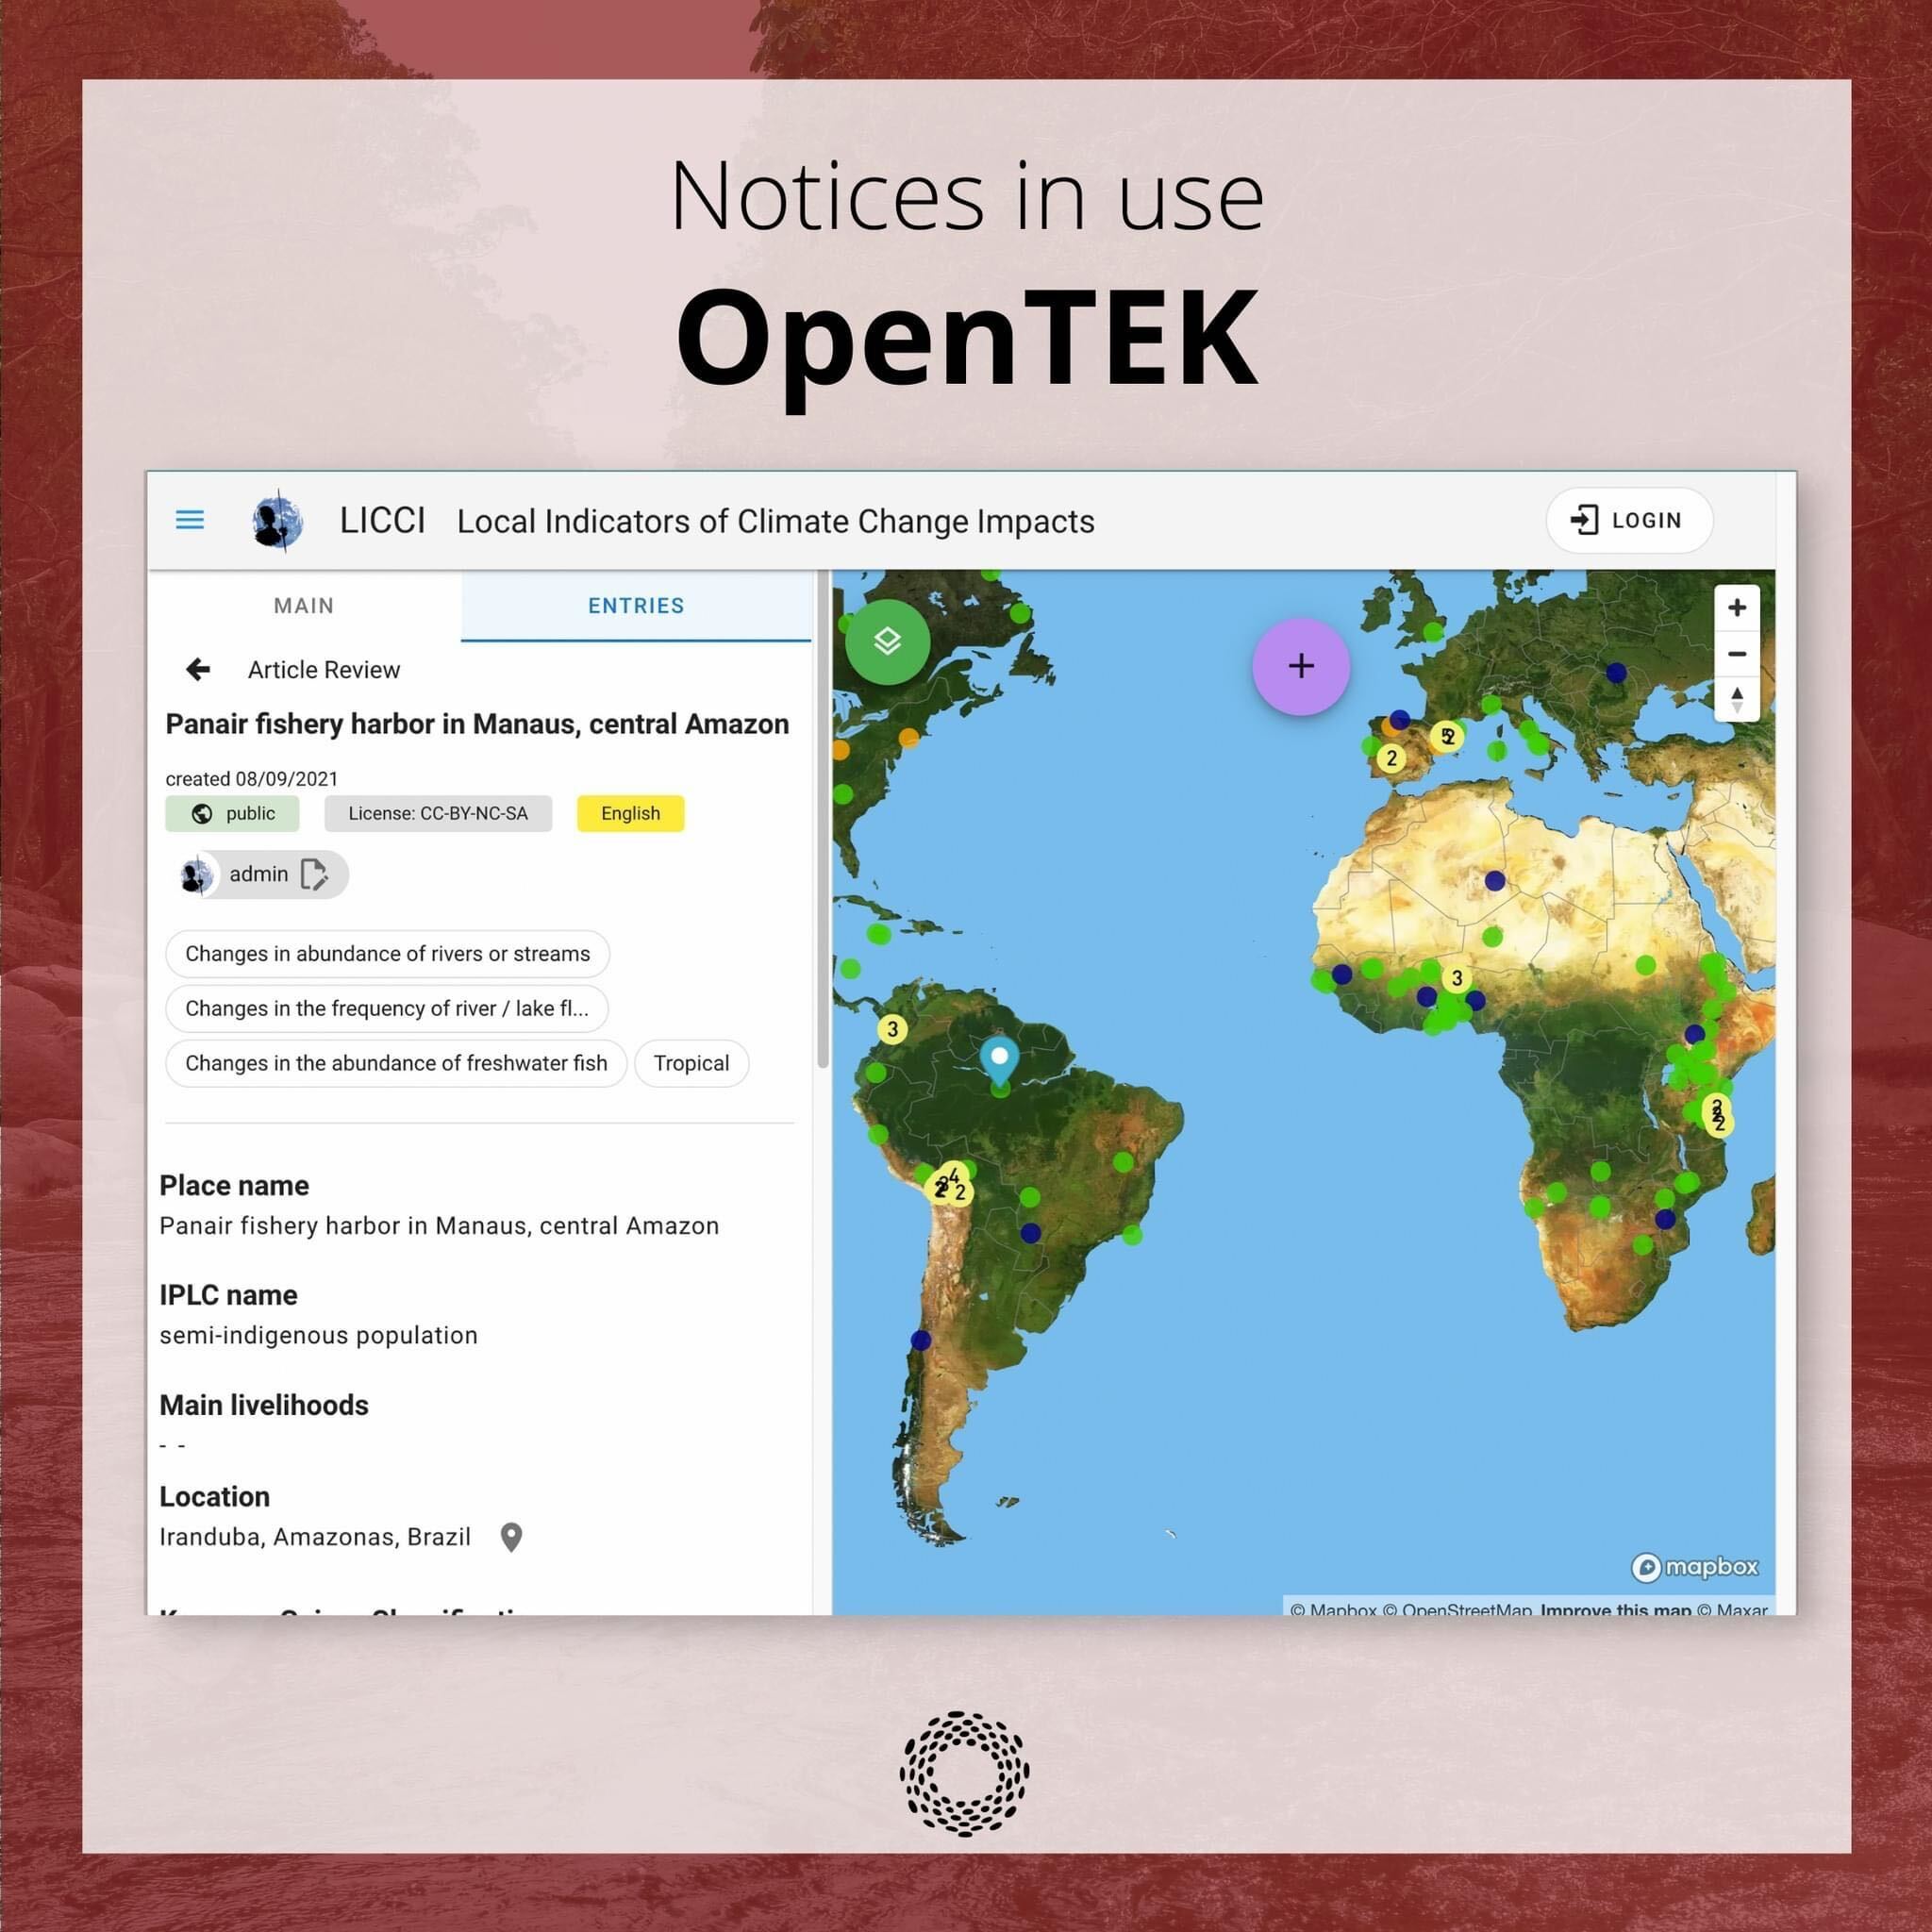 On a decorative red background, text: “Notices in use. OpenTEK.” Below, a screenshot showing a map of the world with colored dots. At the bottom, the Local Contexts logo, a ring made of dots.